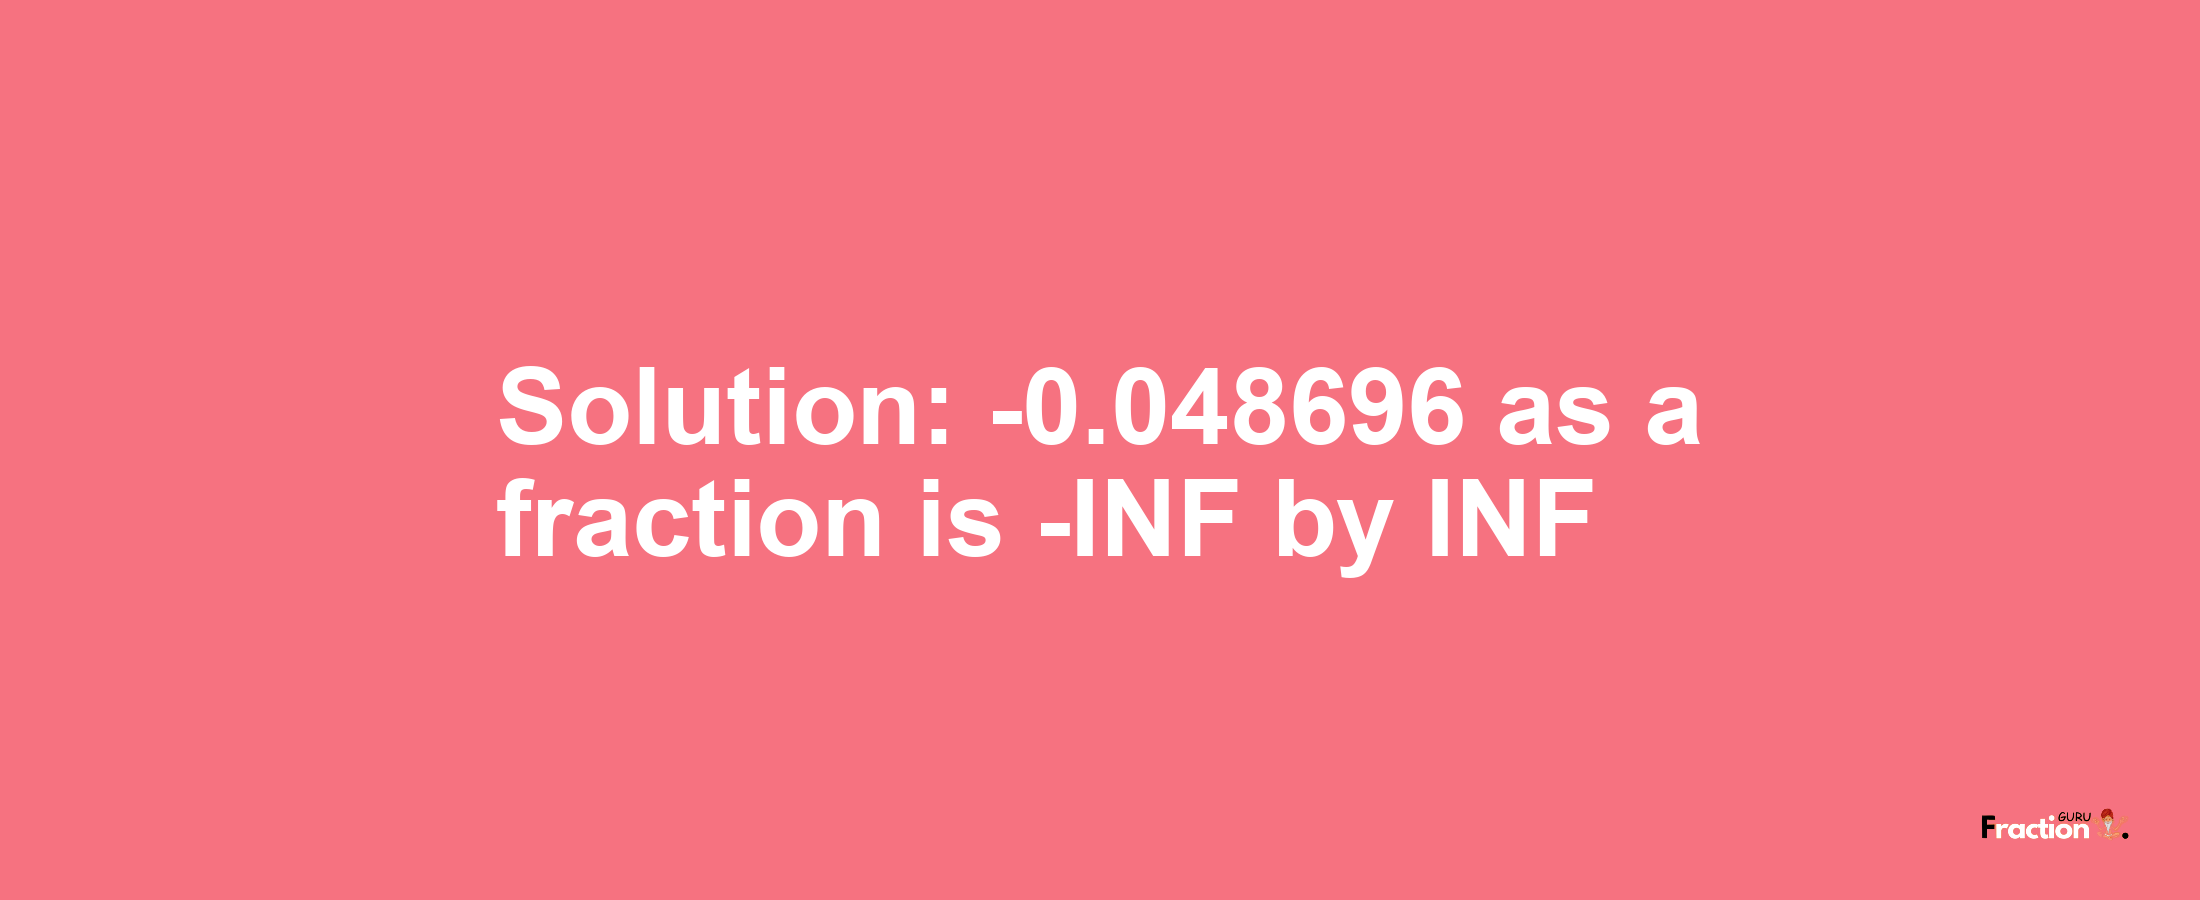 Solution:-0.048696 as a fraction is -INF/INF